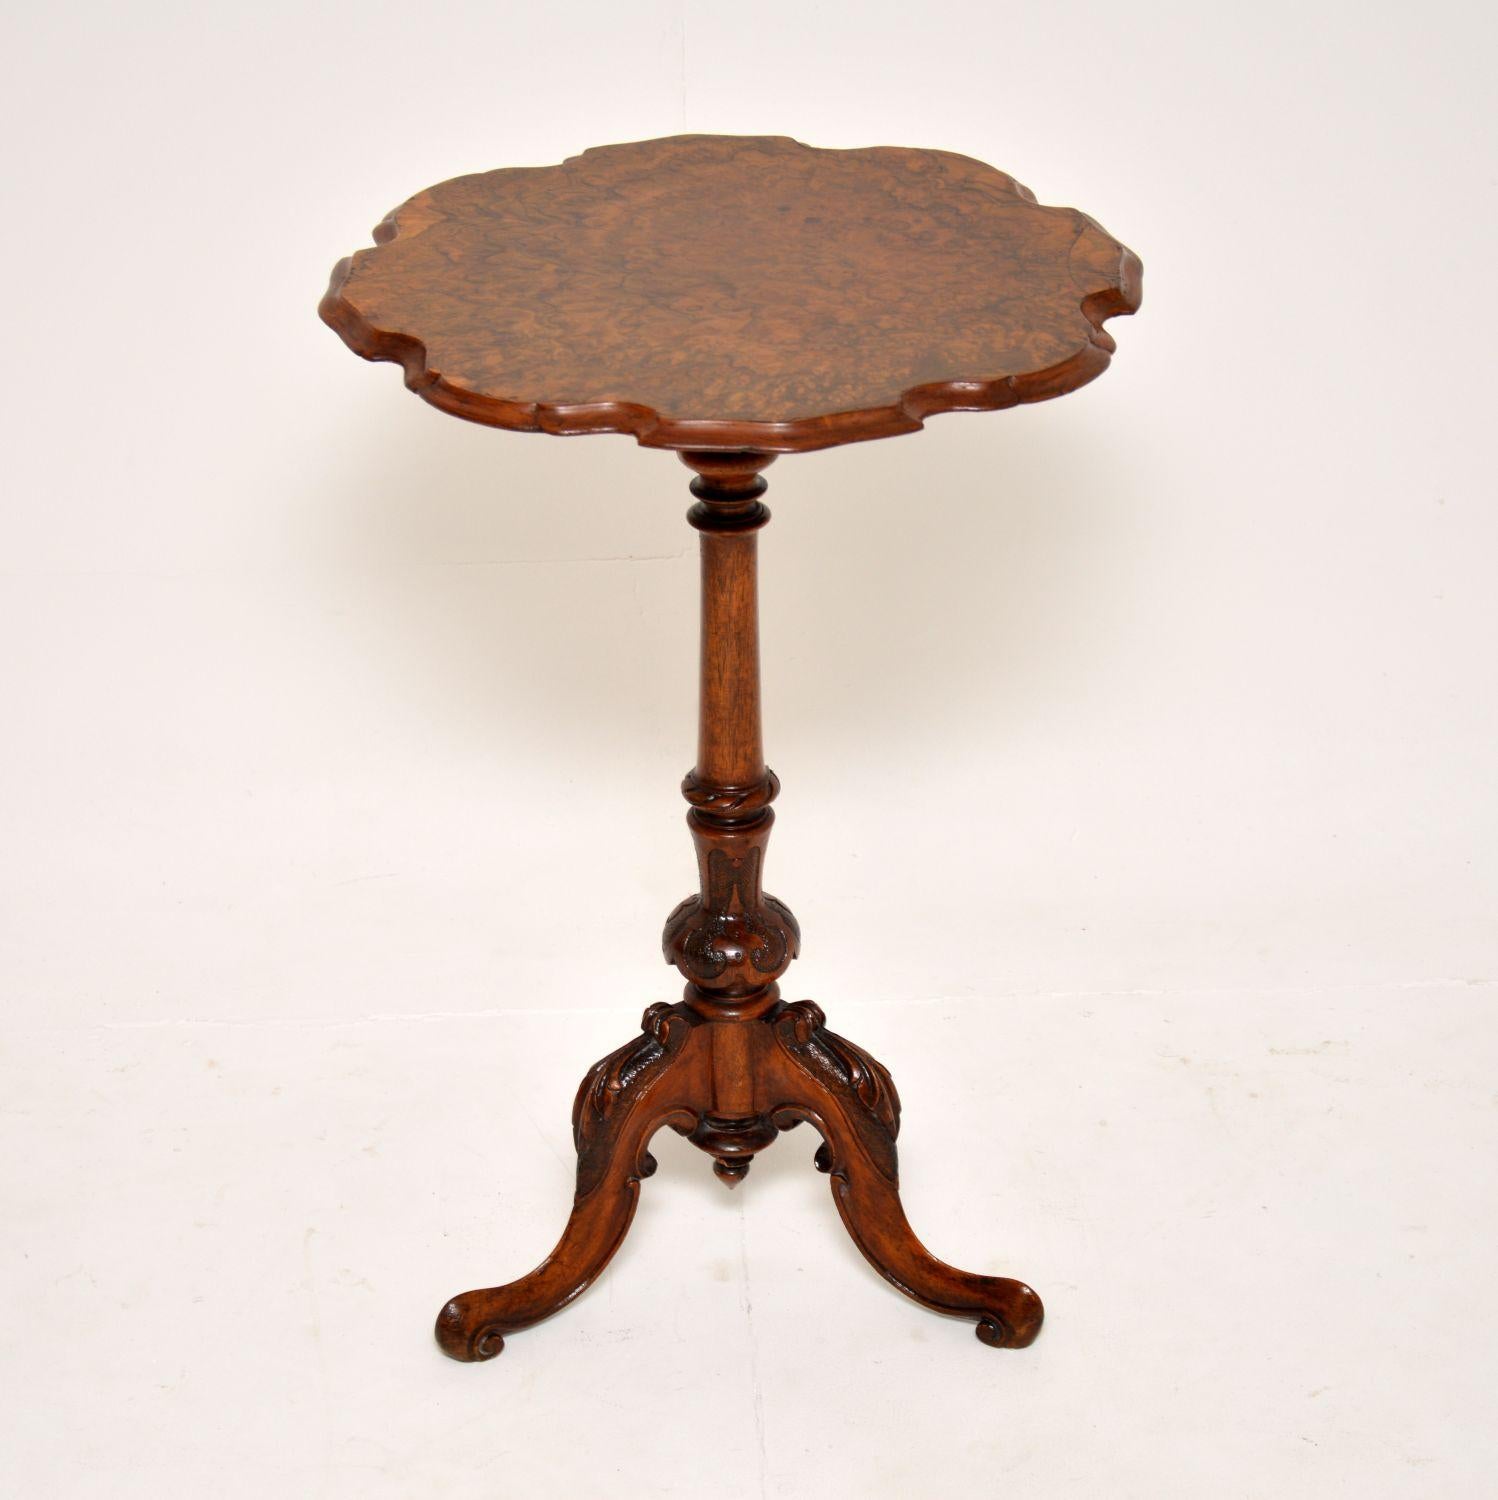 A fantastic antique Victorian walnut occasional side table of the highest order. This was made in England, it dates from around the 1860-1880 period.

It is of amazing quality, with a beautifully shaped top and stunning walnut grain patterns. This